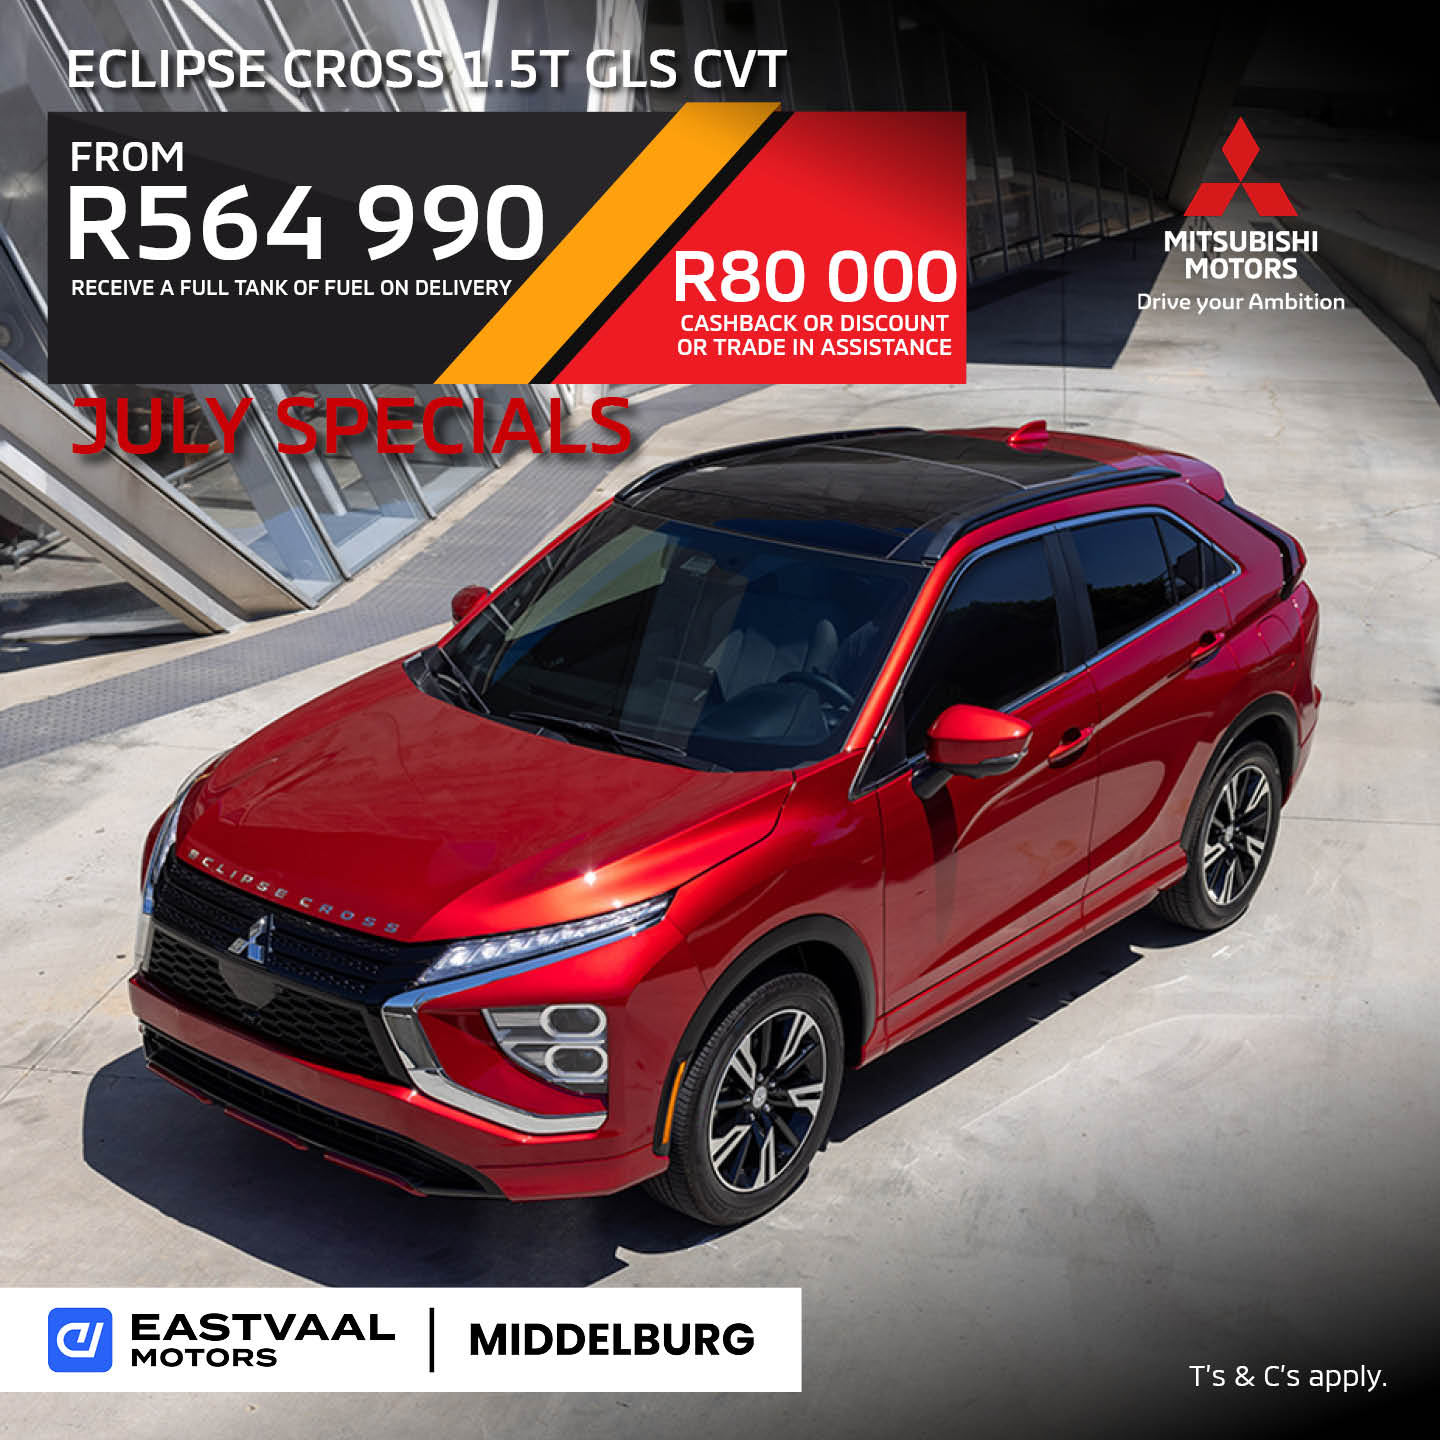 Eclipse Cross 1.5T GLS CVT image from 